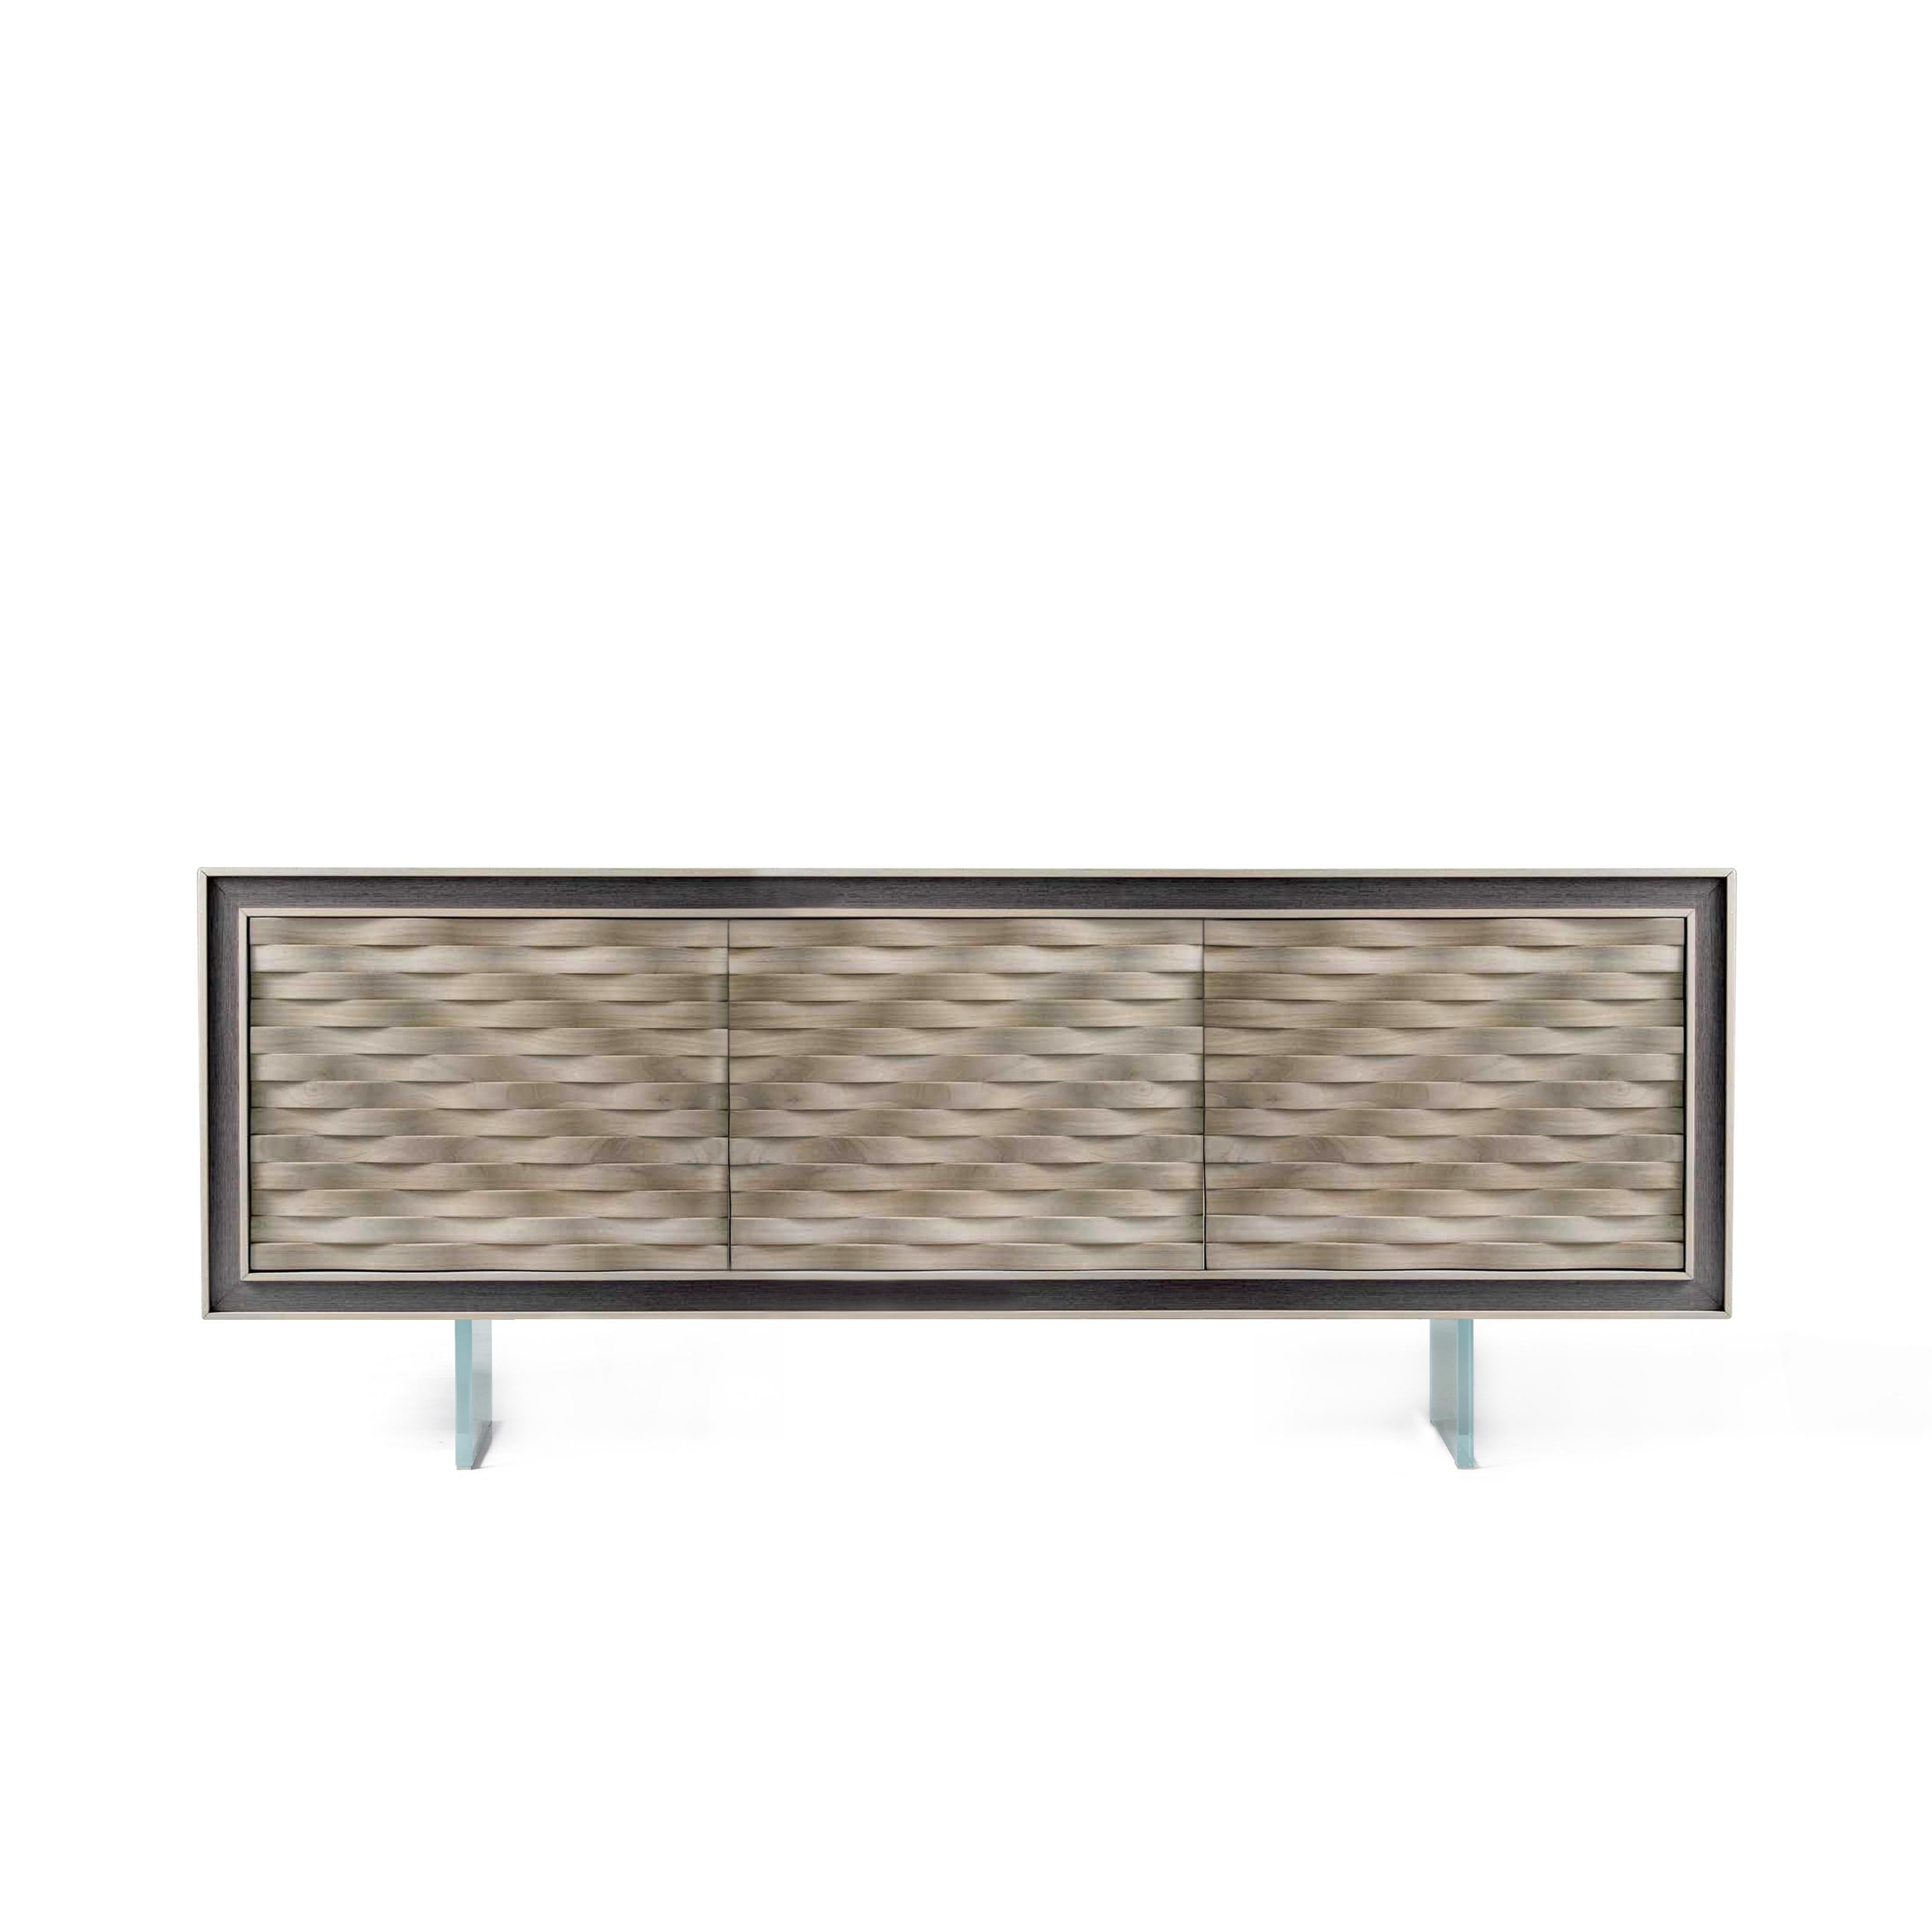 Quadra Nastro Solid Wood Sideboard, Walnut in Natural Grey Finish, Contemporary For Sale 1